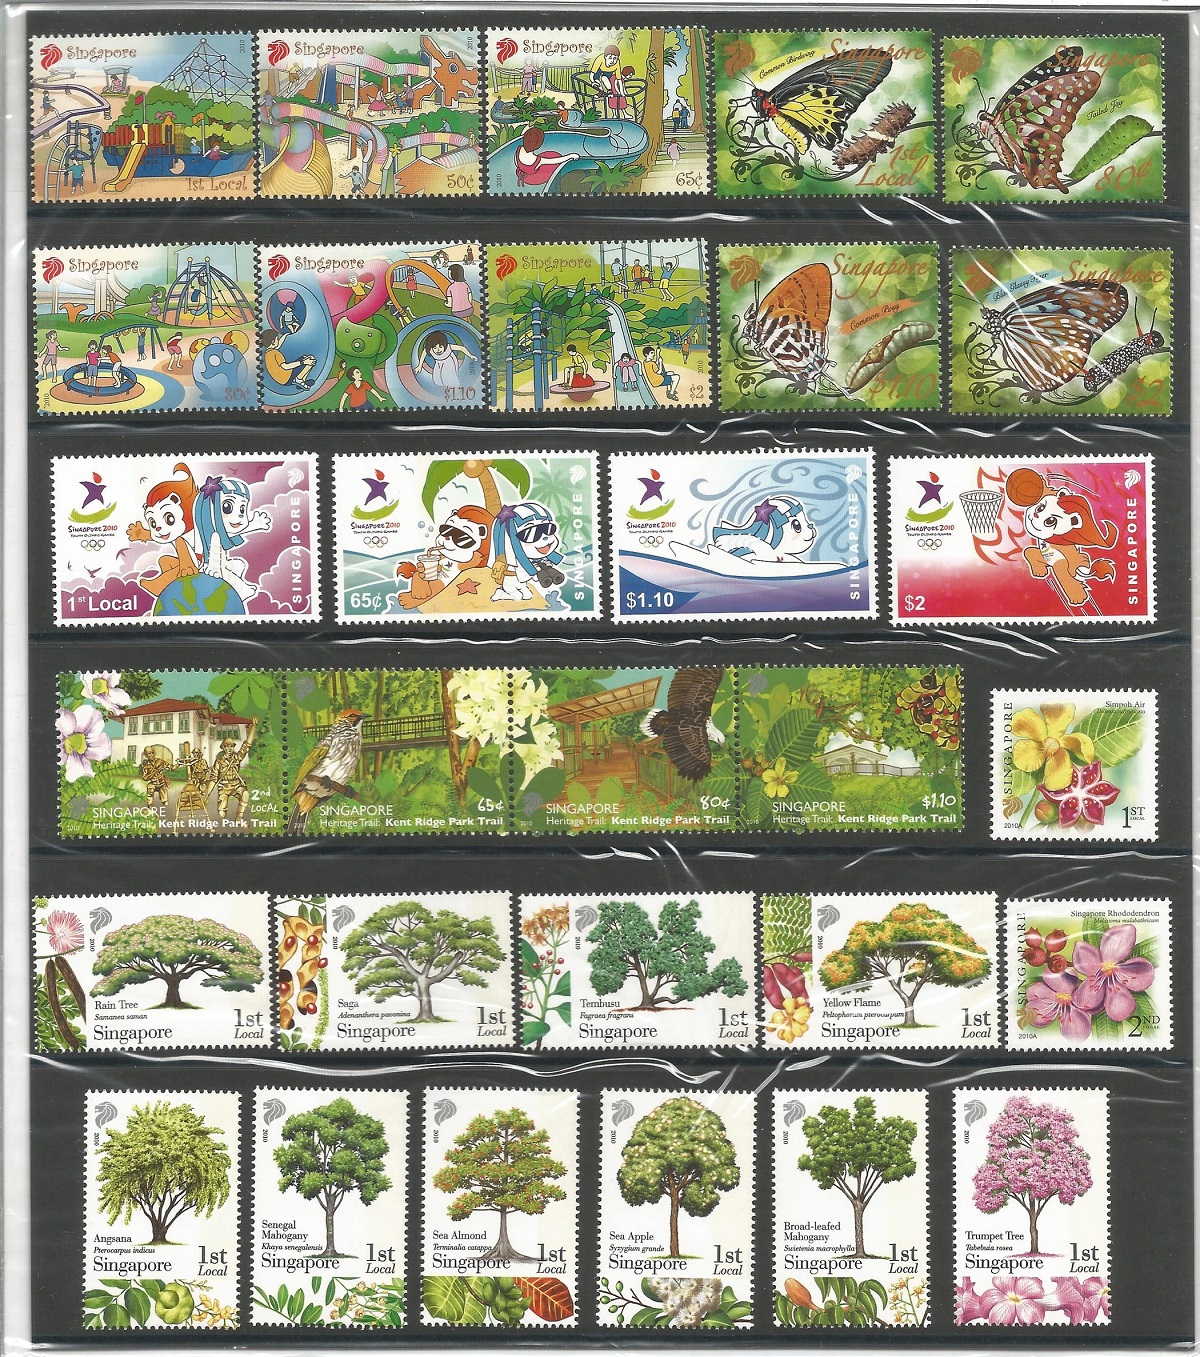 Singapore 2010 presentation book of stamps in slipcase. Unmounted mint stamps. Good condition. We - Image 2 of 2